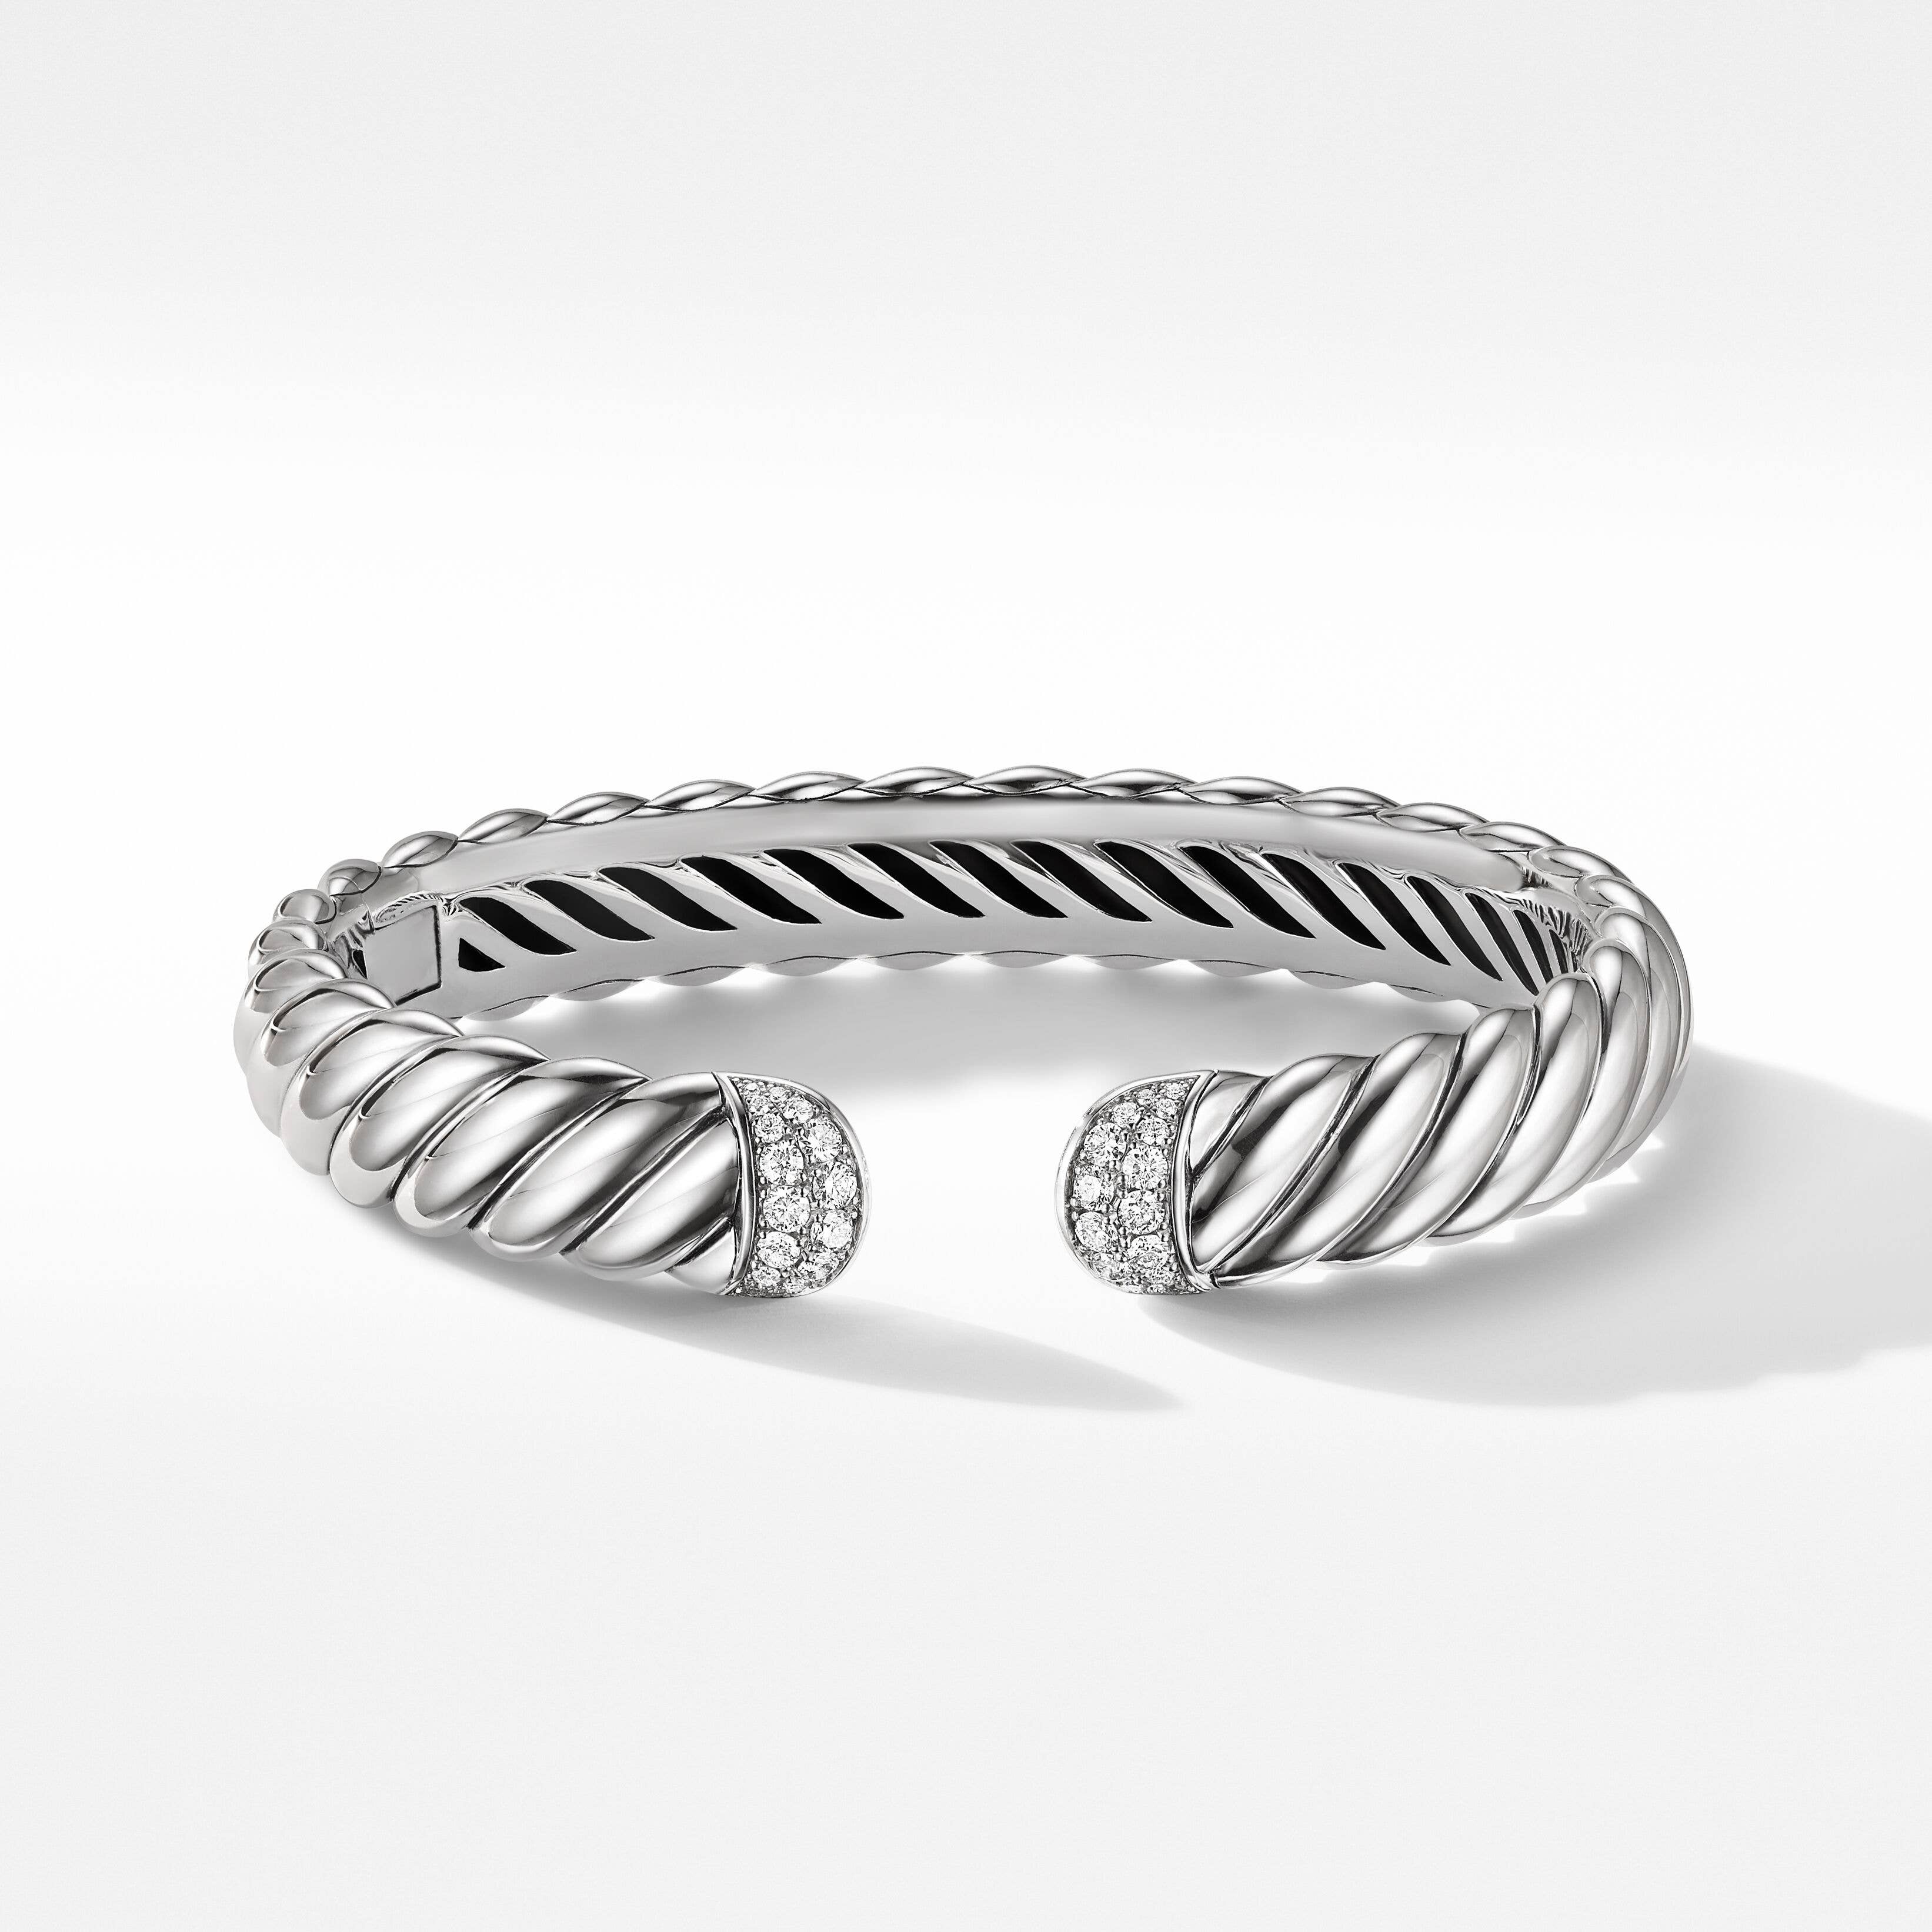 Sculpted Cable Cuff Bracelet in Sterling Silver with Pavé Diamonds